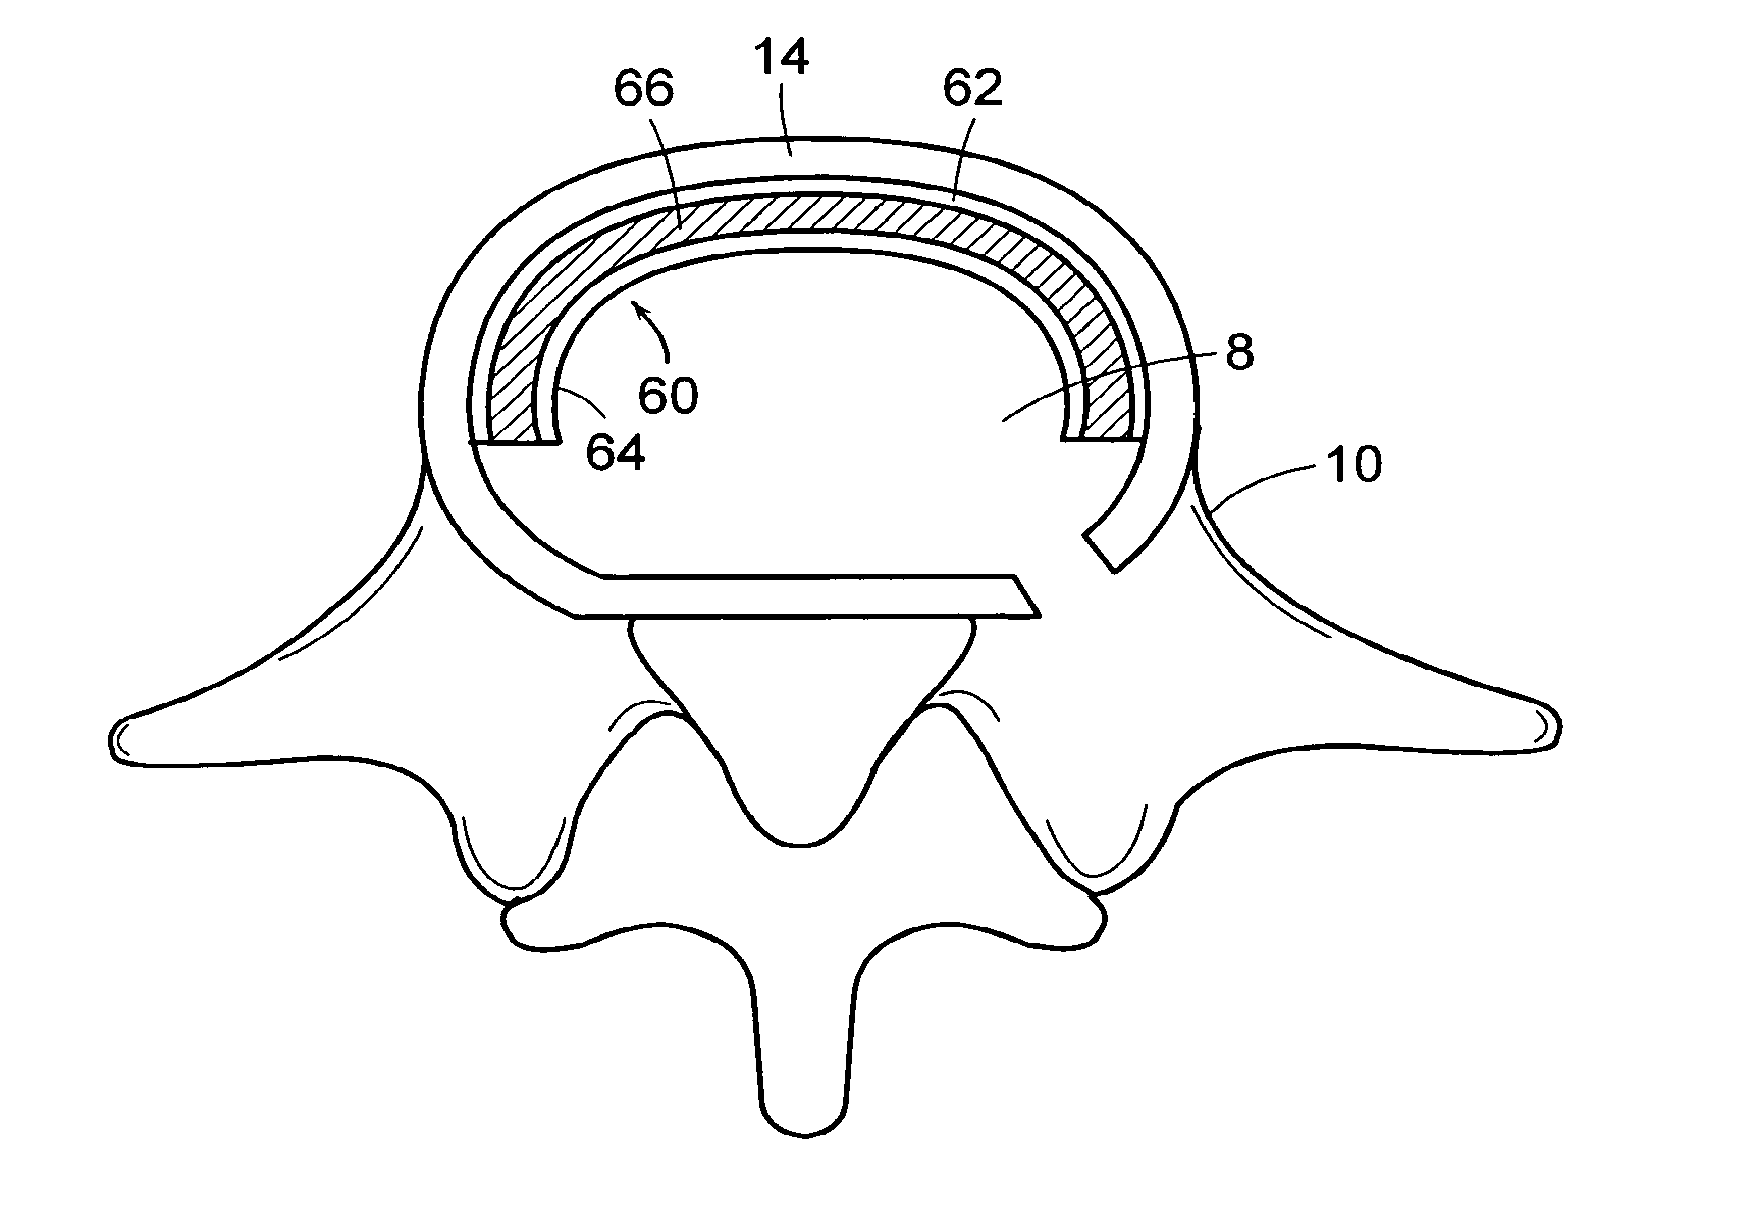 In-situ formed intervertebral fusion device and method